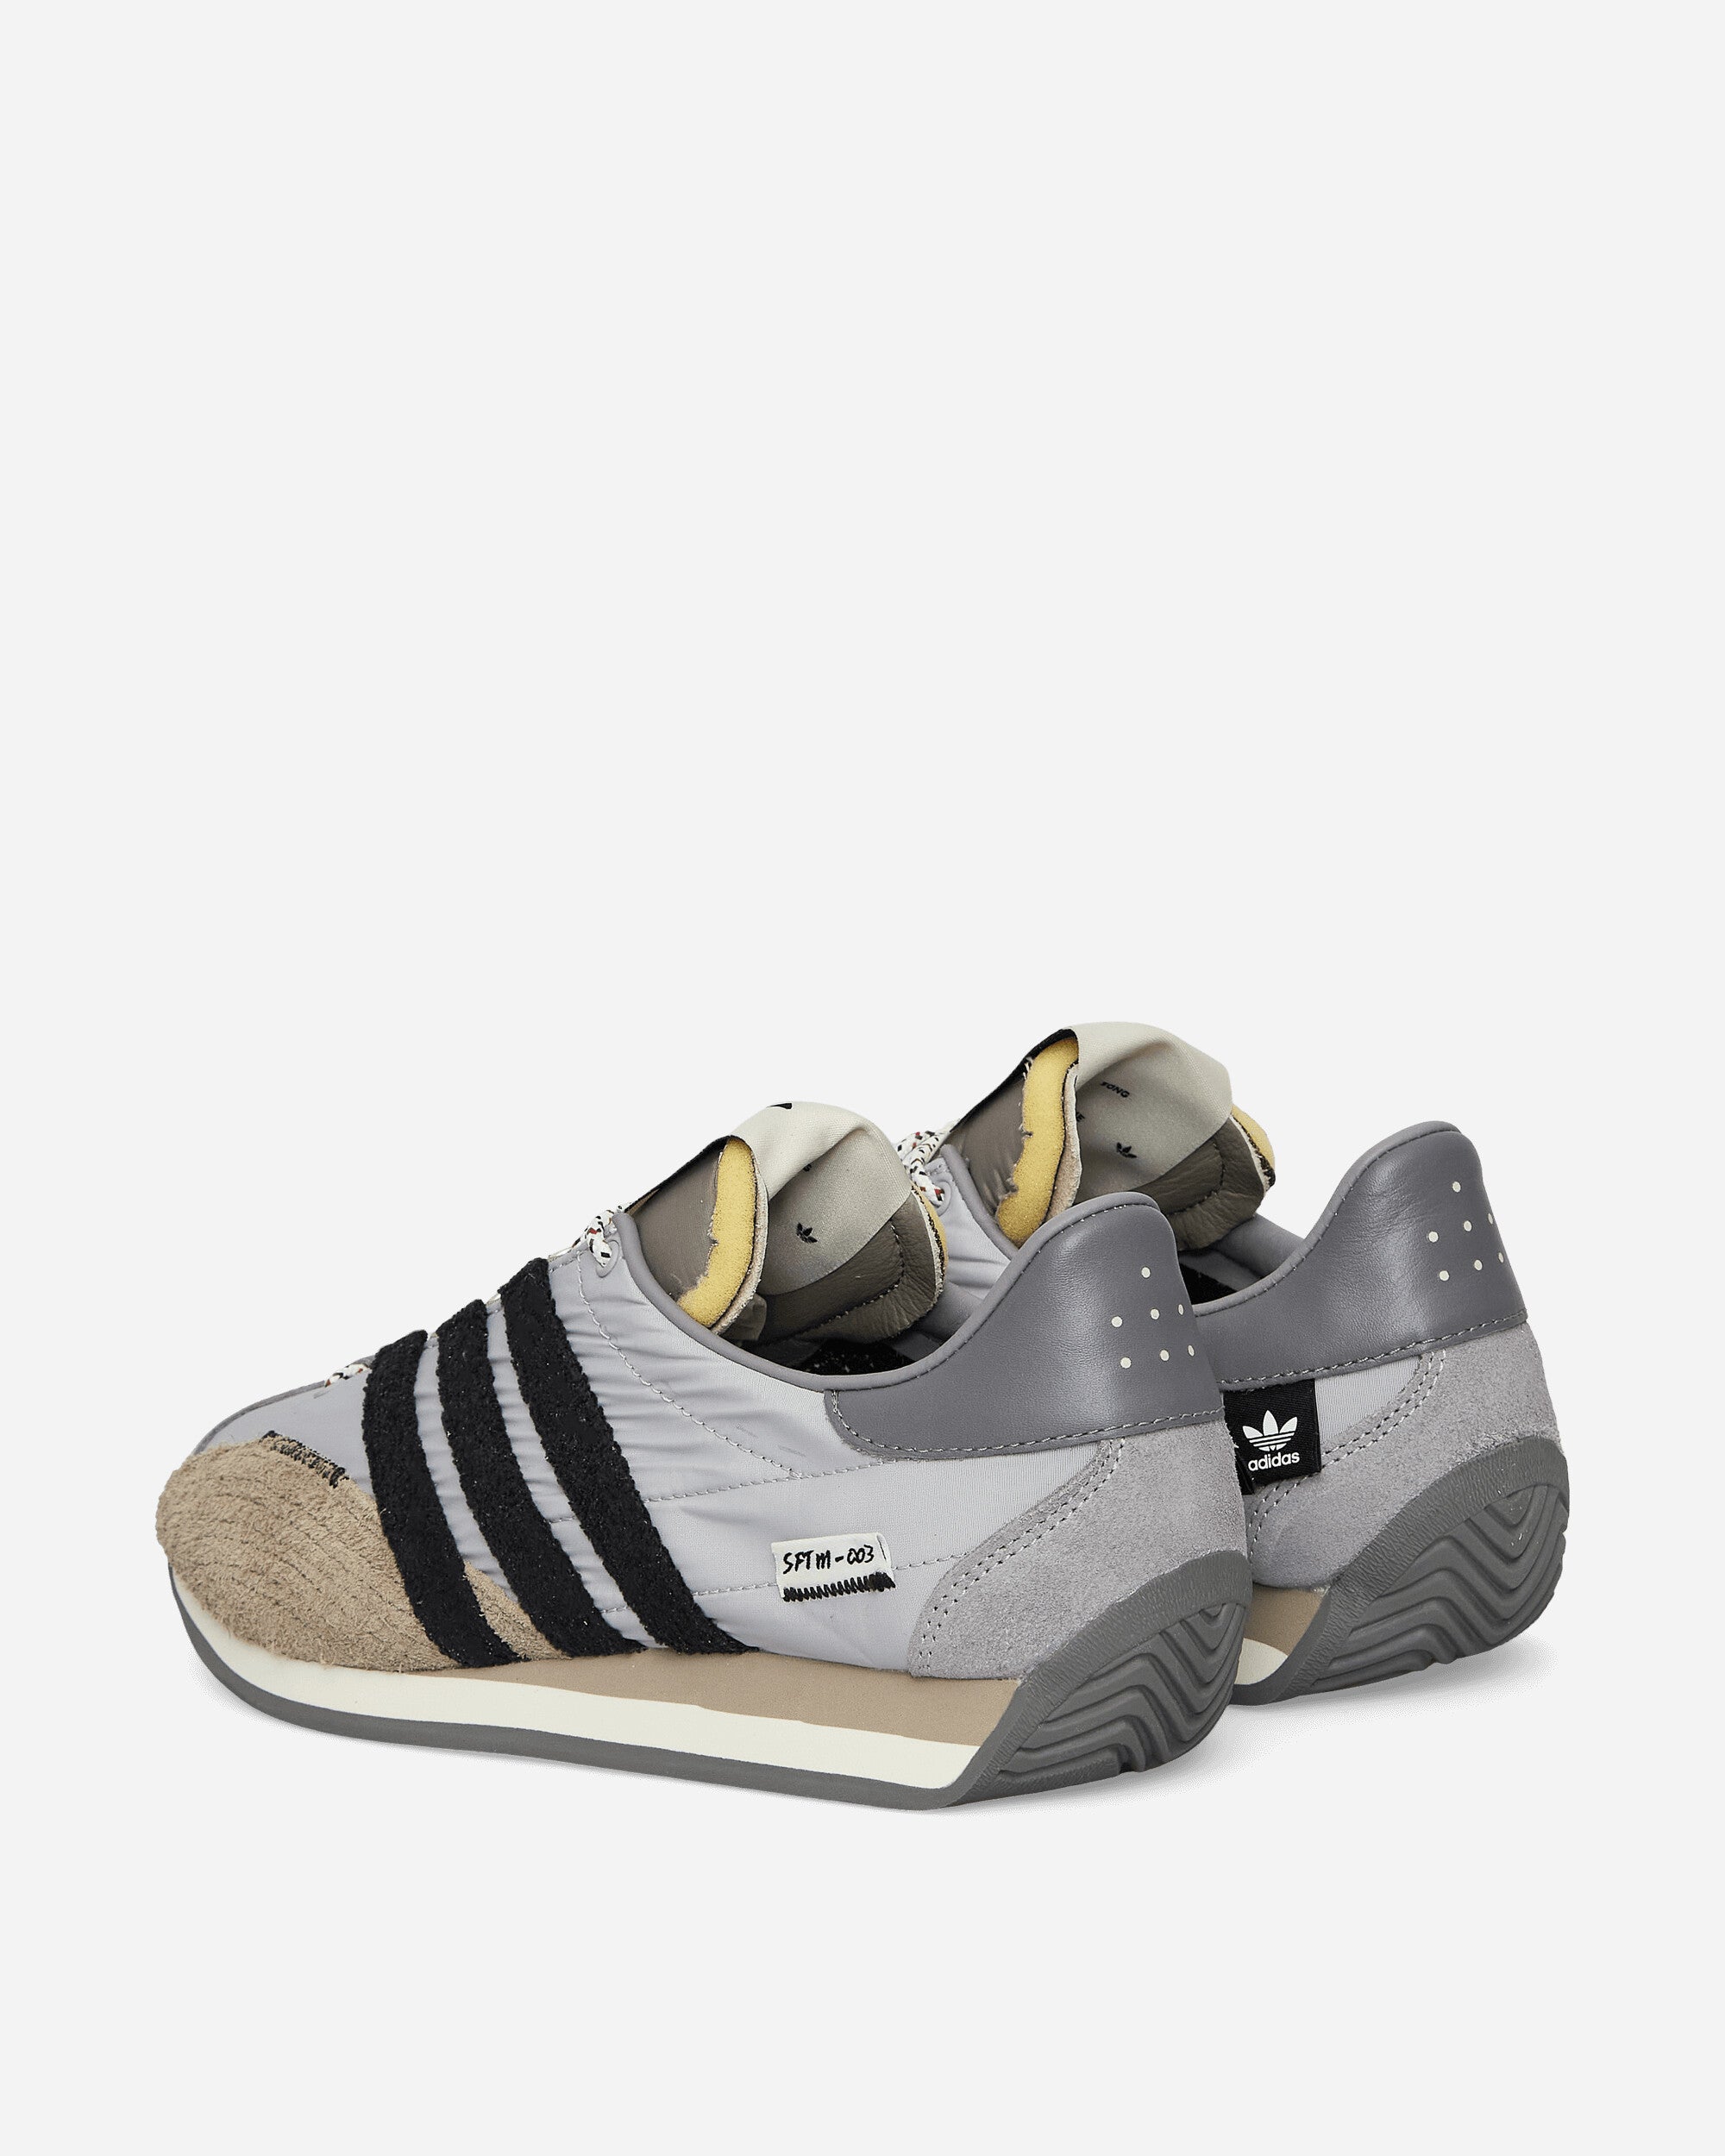 adidas Country Og Sftm Grey Two/Core Black Sneakers Low IH7519 001